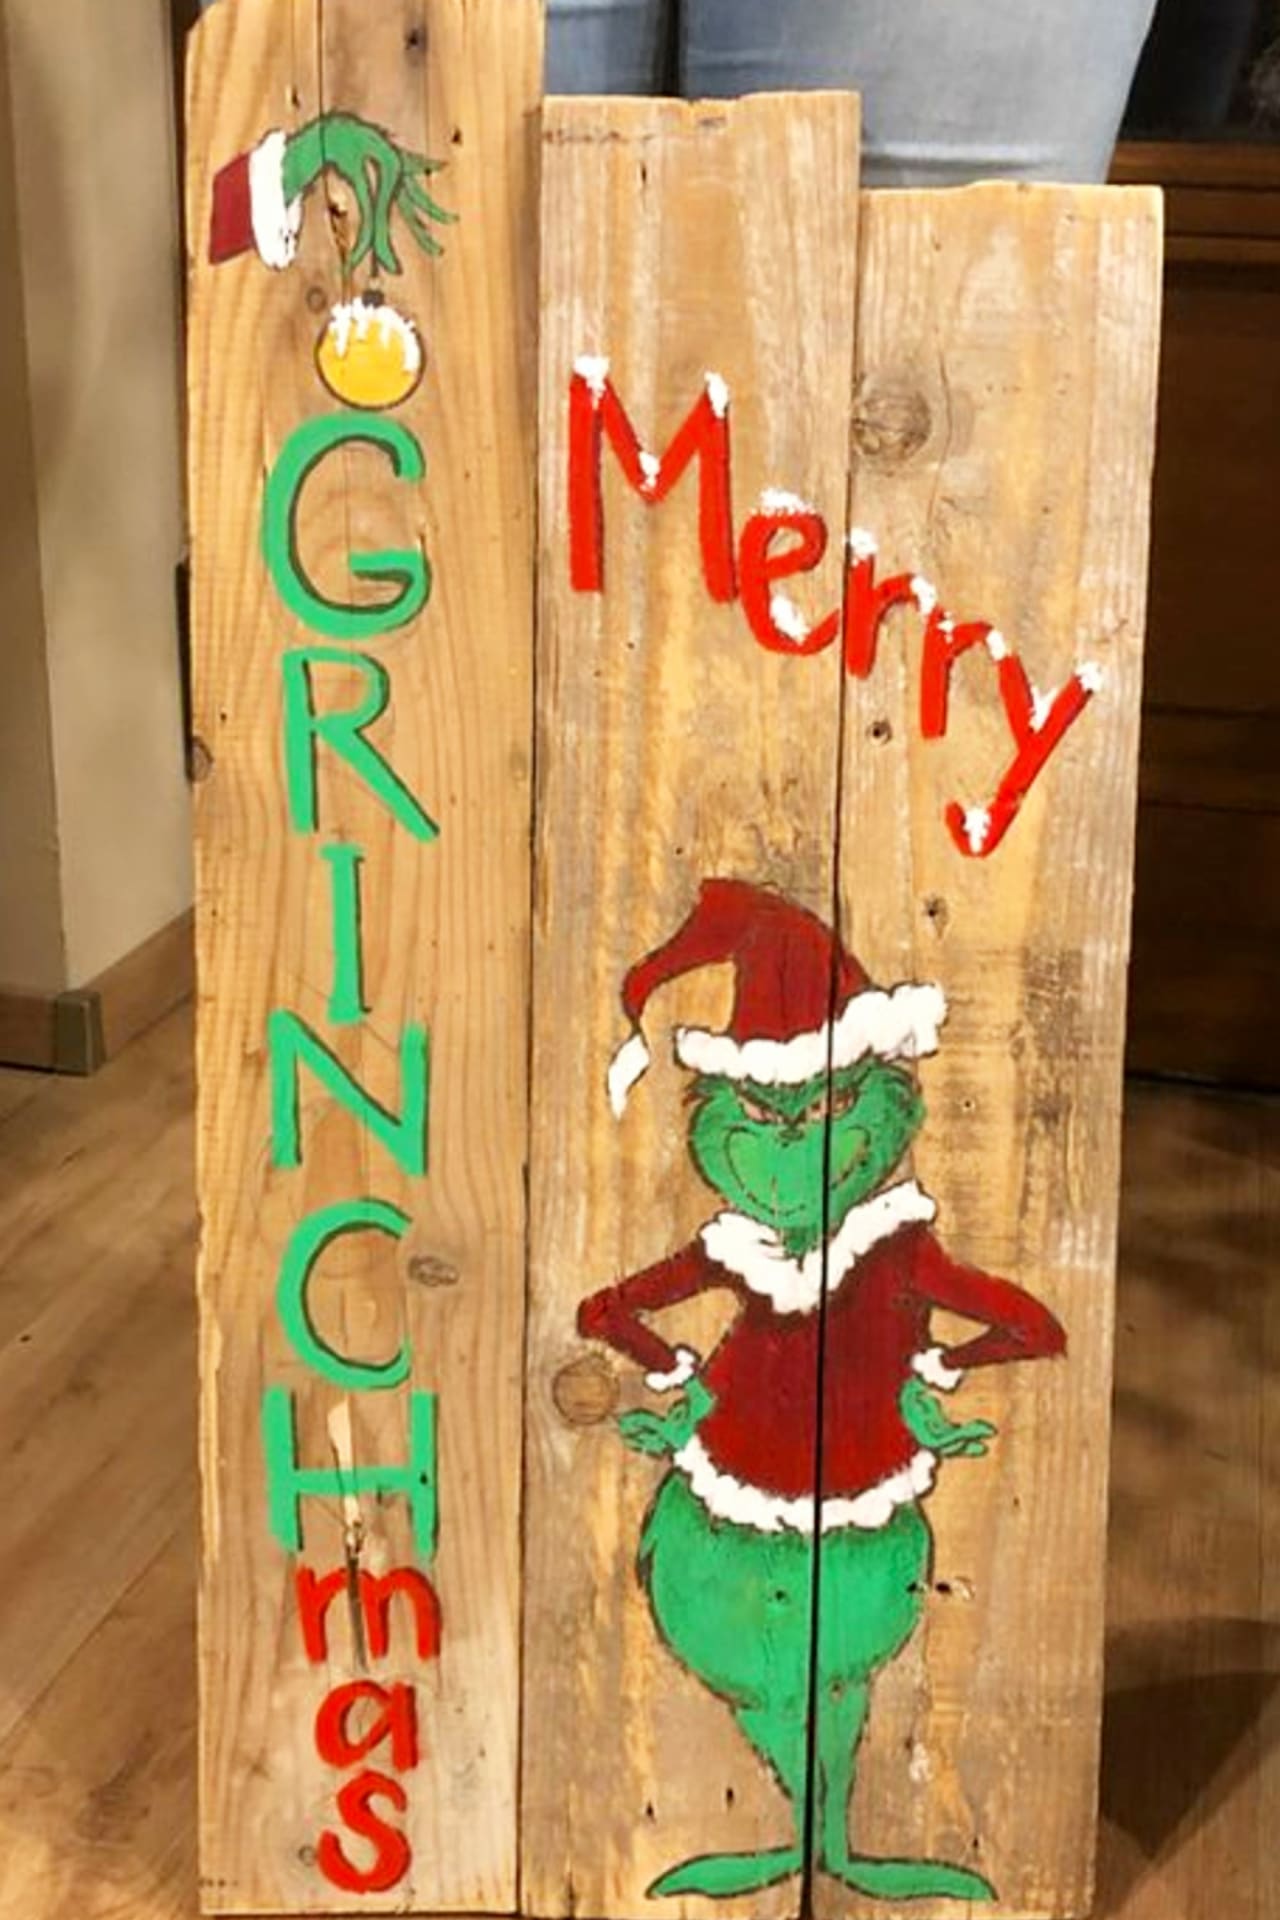 DIY grinch decorations and yard art.  How to make DIY Grinch Decorations and grinch ornaments for front doors and house outdoors - Grinch decorations for the holidays